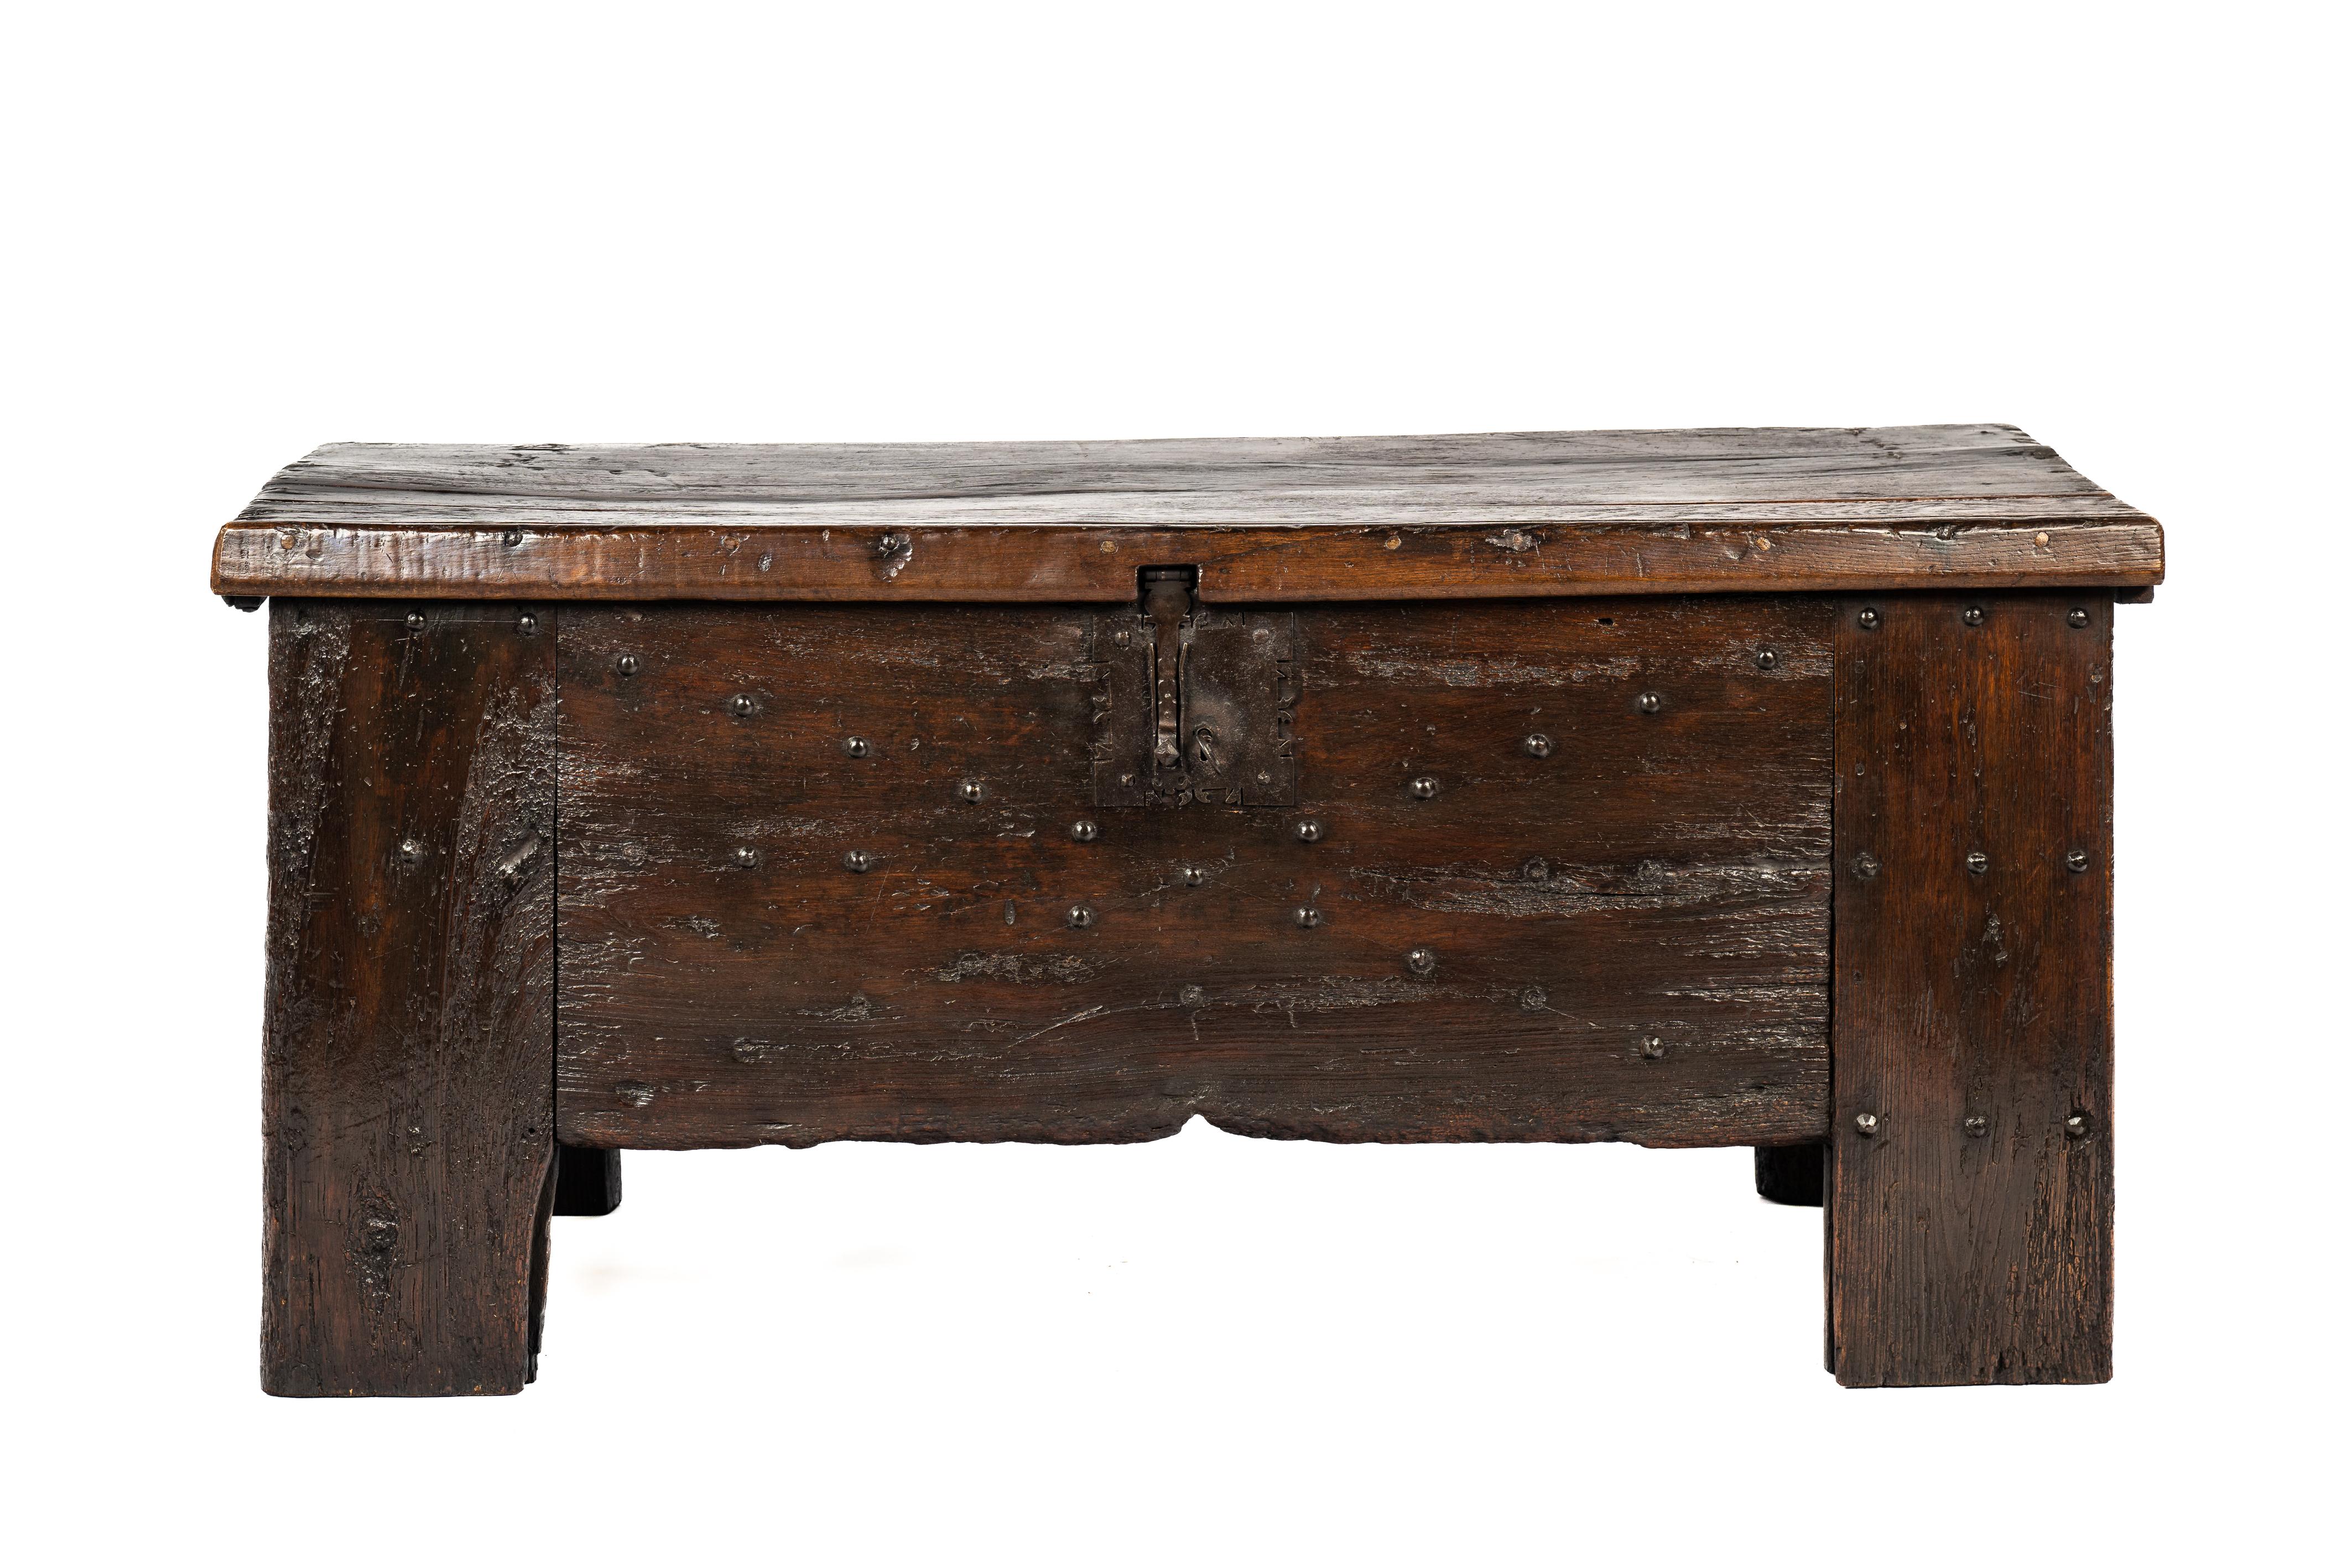 On offer here is an antique early 17th century Trunk or chest that was made in Northern Spain in the 1620s. The trunk was composed of boards of thick solid boards of chestnut wood. The trunk or case piece was enriched with steel forged steel nails